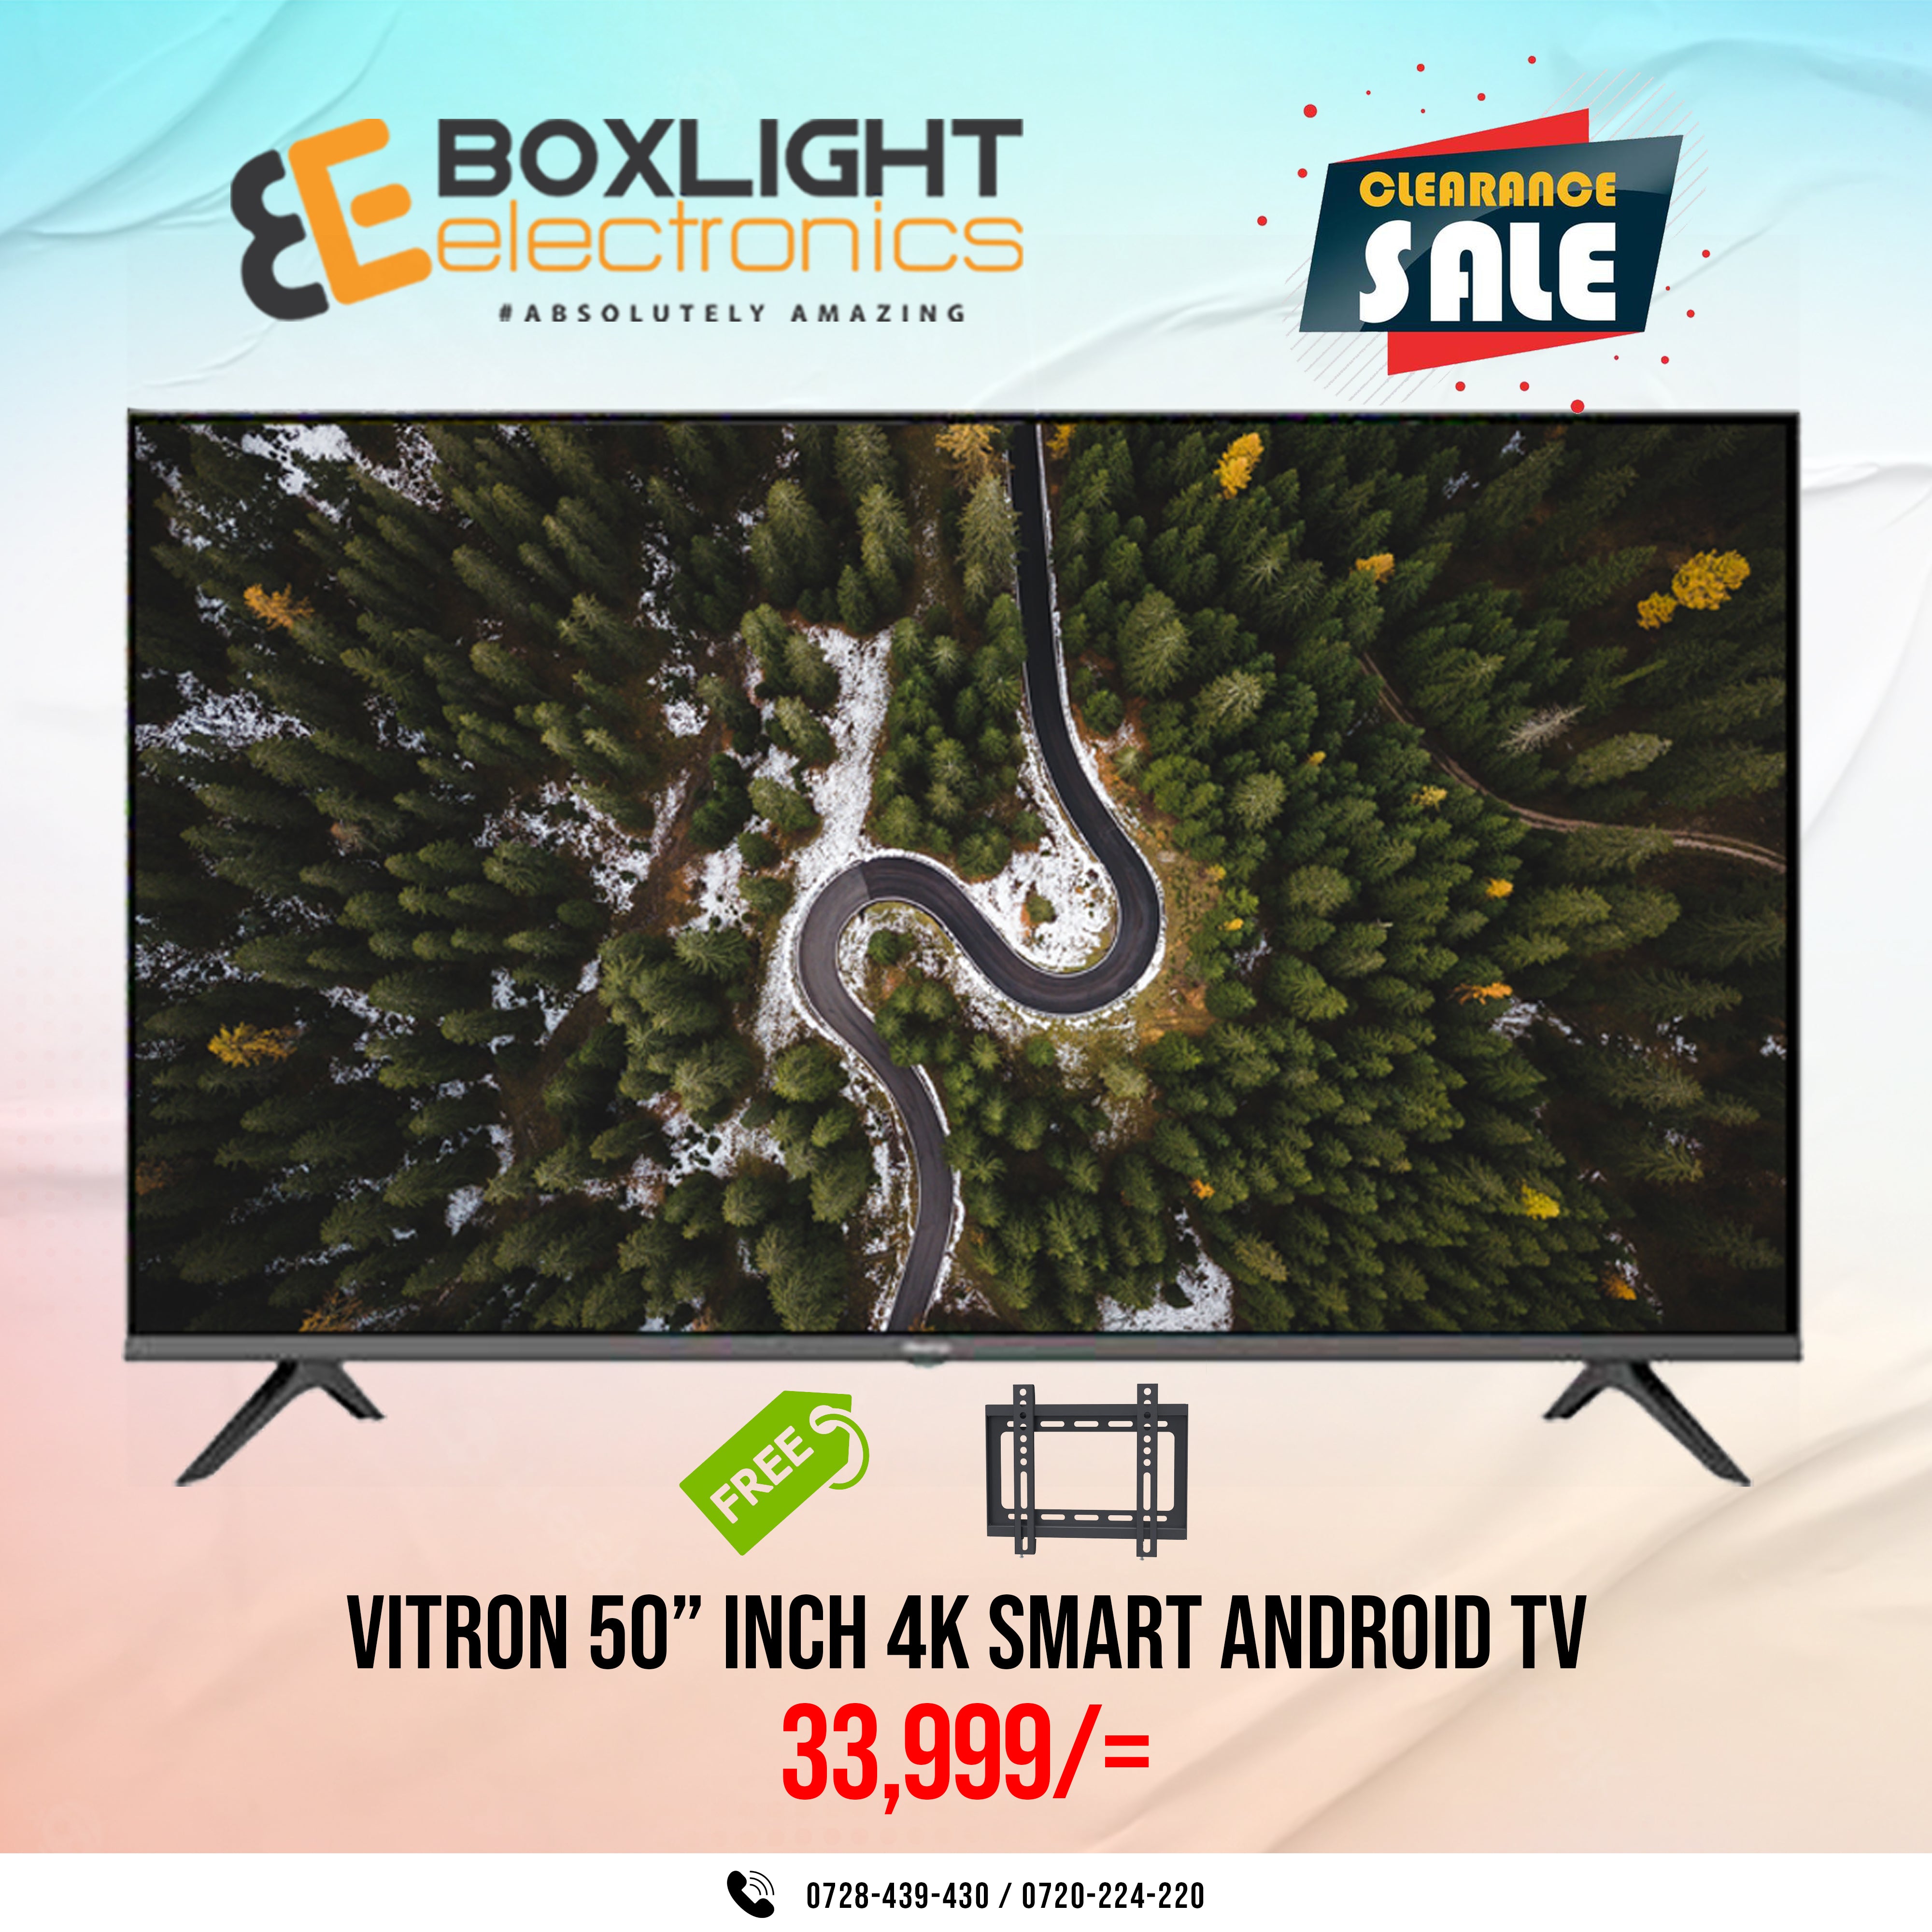 Vitron 50" Inch FRAMELESS 4K UHD Android TV BLUETOOTH + Free Gifts